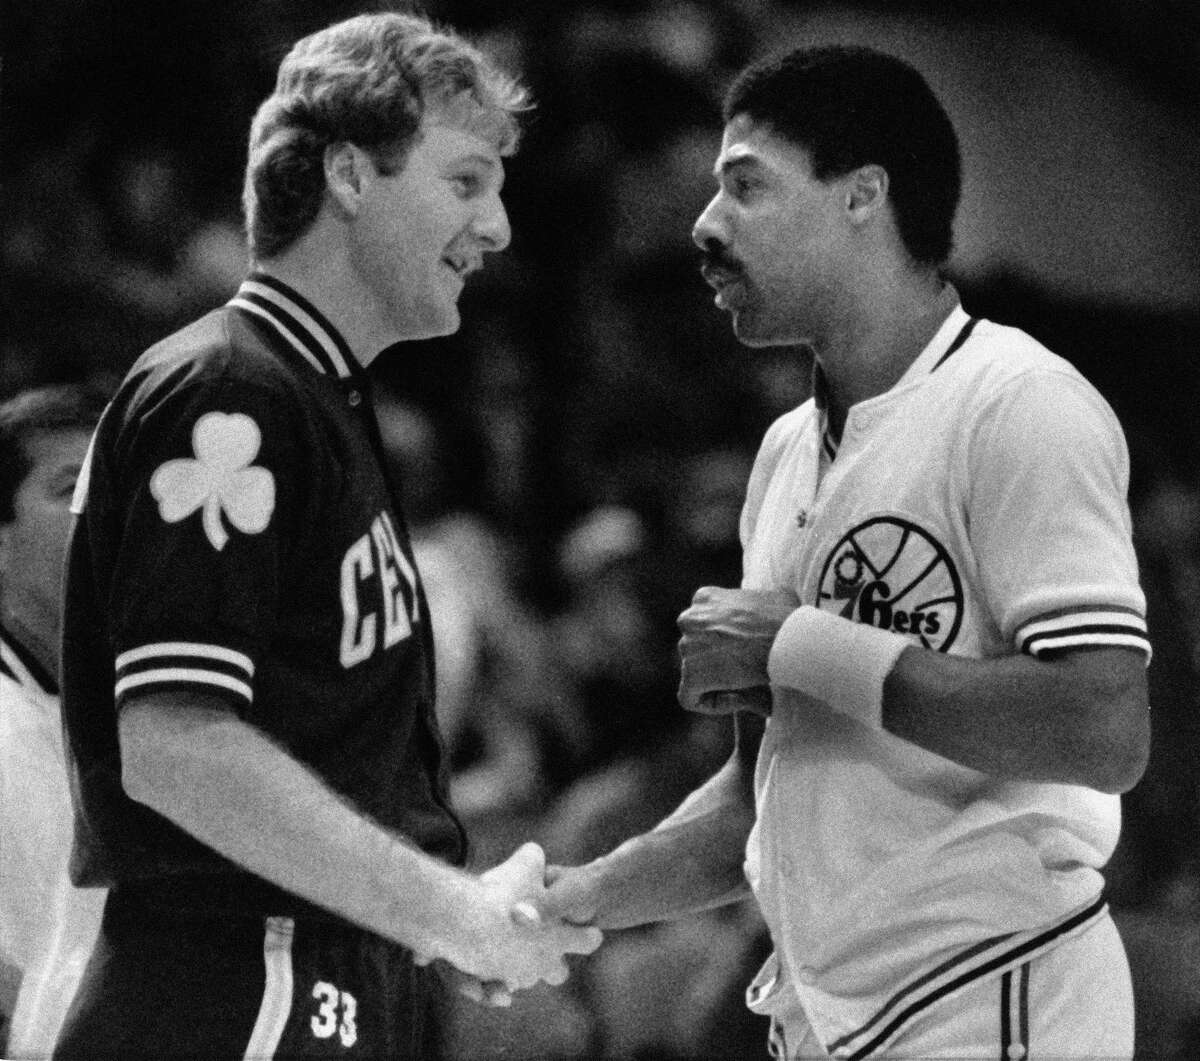 1980-81 Philadelphia’s Julius Erving edged Eastern Conference rival Larry Bird of Boston by 31 points. There wasn’t much separating their numbers with Erving averaging 24.6 points, 8 rebounds and 4.4 assists to Bird’s 21.2, 10.9 and 5.5. Erving may have gotten the MVP, but Bird got the last laugh as the Celtics overcame a 3-1 deficit against Philadelphia in the East final before beating the Rockets in the NBA Finals.